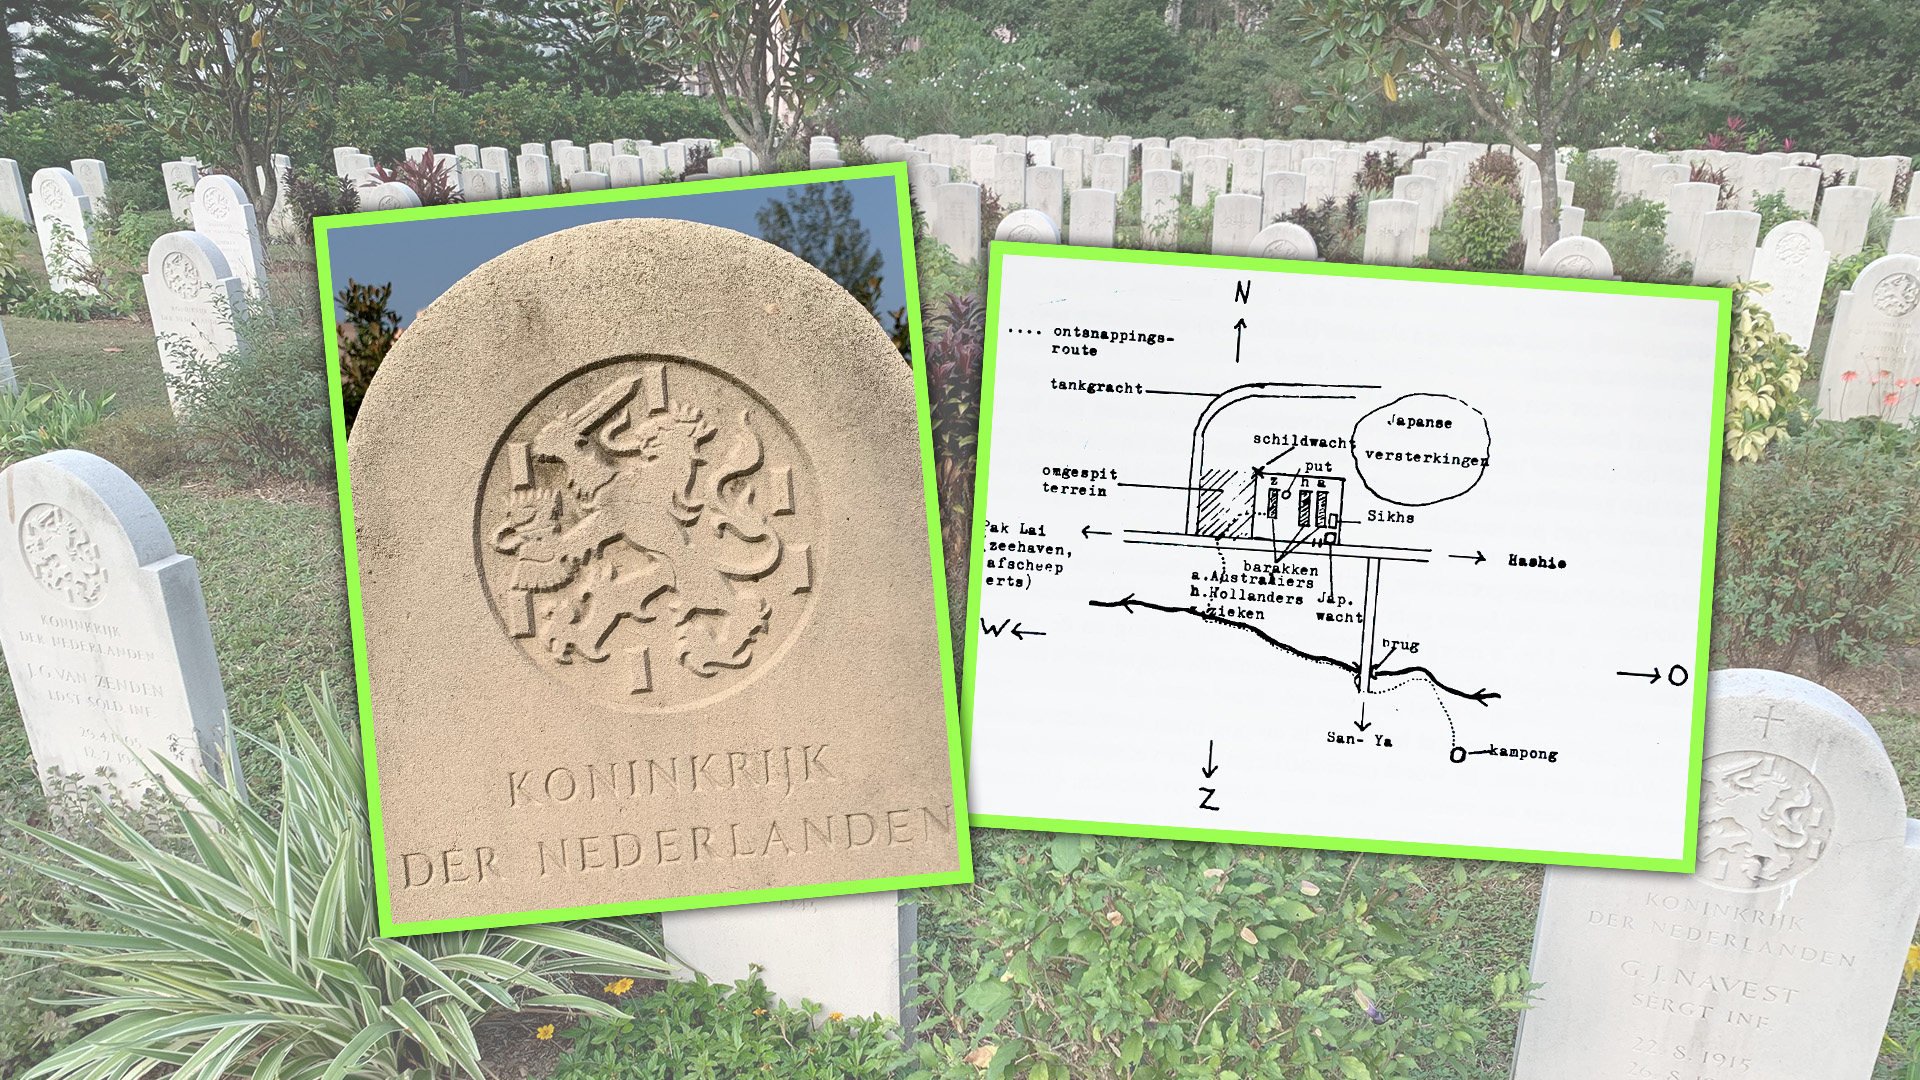 The tombstone belongs to Job van Belzen who survived a Tokyo POW camp but died in a plane crash during his repatriation. The sketch shows a POW camp. Photo: SCMP composite/Justin Ho/AJ von Metzsch, Bericht uit Hainan (1994)